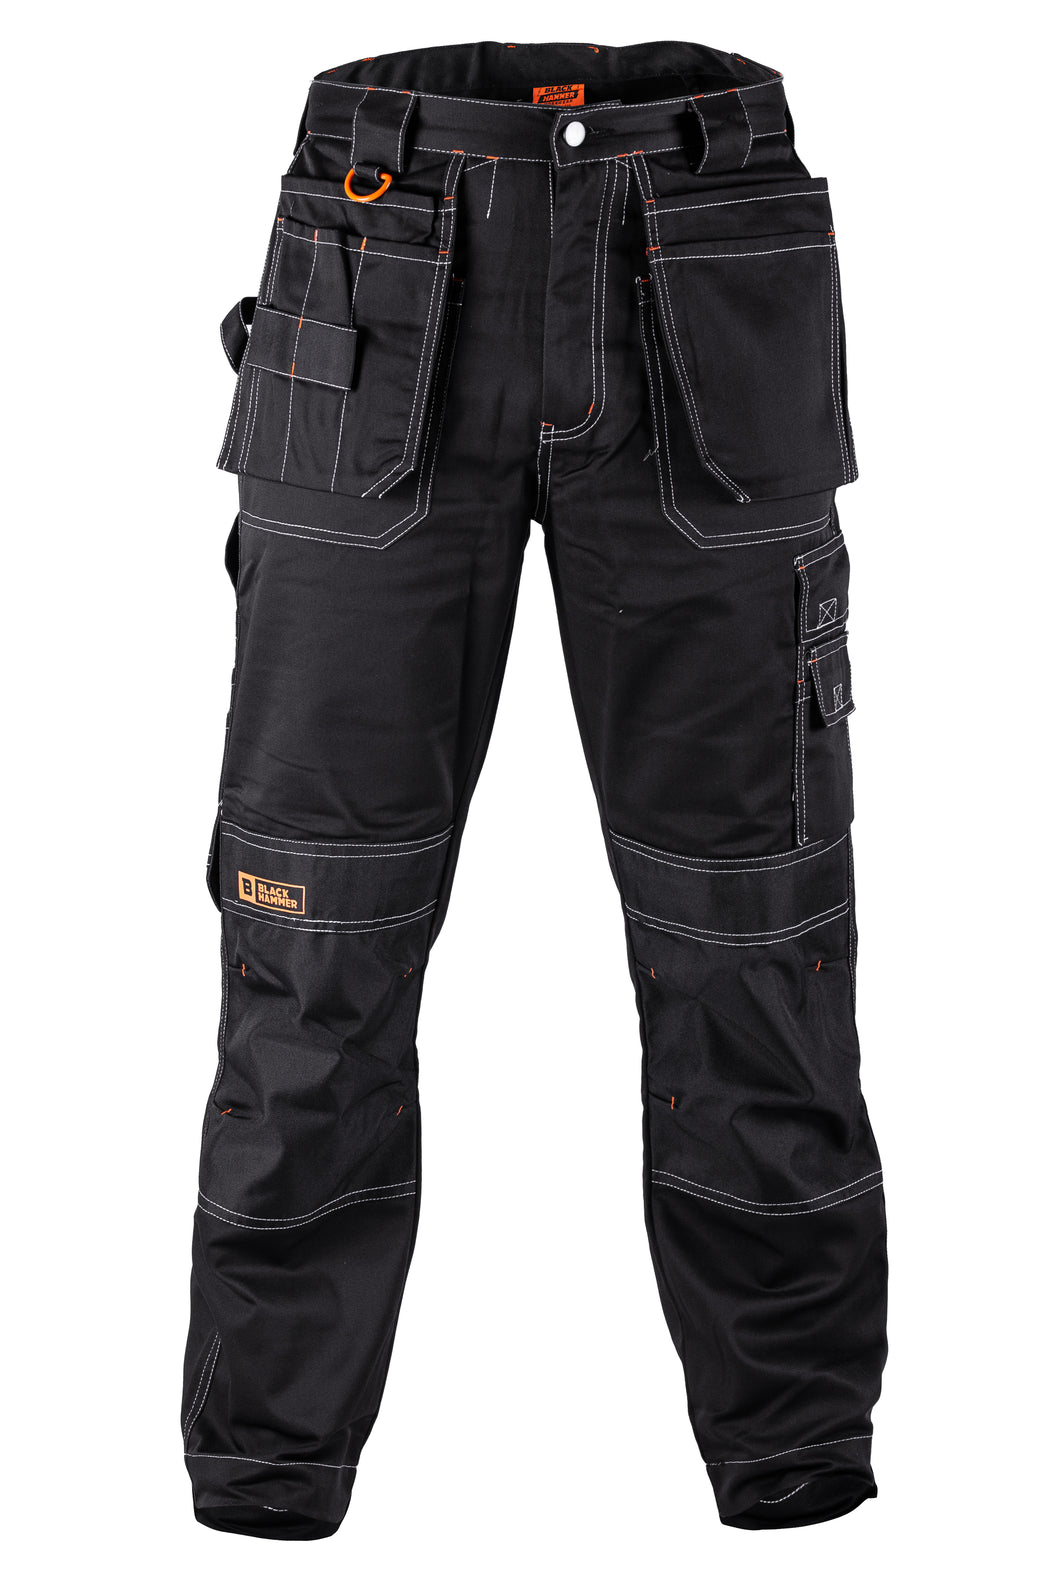 Black Hammer Mens Work Trousers Multi Pockets Cargo Heavy Duty Triple Stitched Reinforcing Stress Points Pants and Knee Pad Pockets Godzilla Workwear Trade Trousers Black